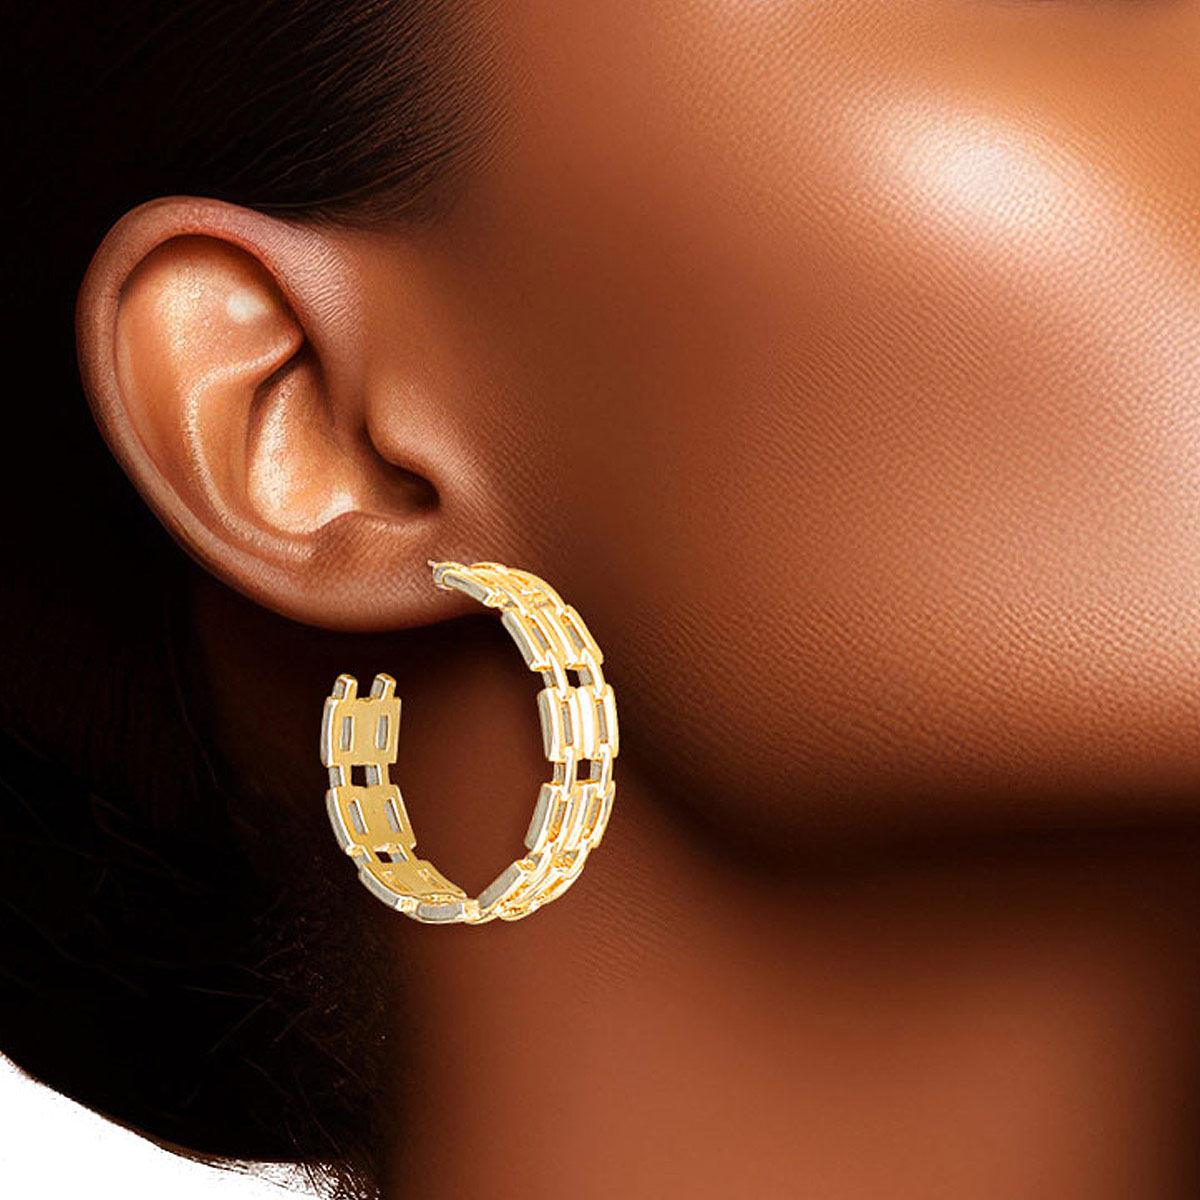 Upgrade Your Style with Chic Gold-finished Small Chain Link Open Hoop Earrings